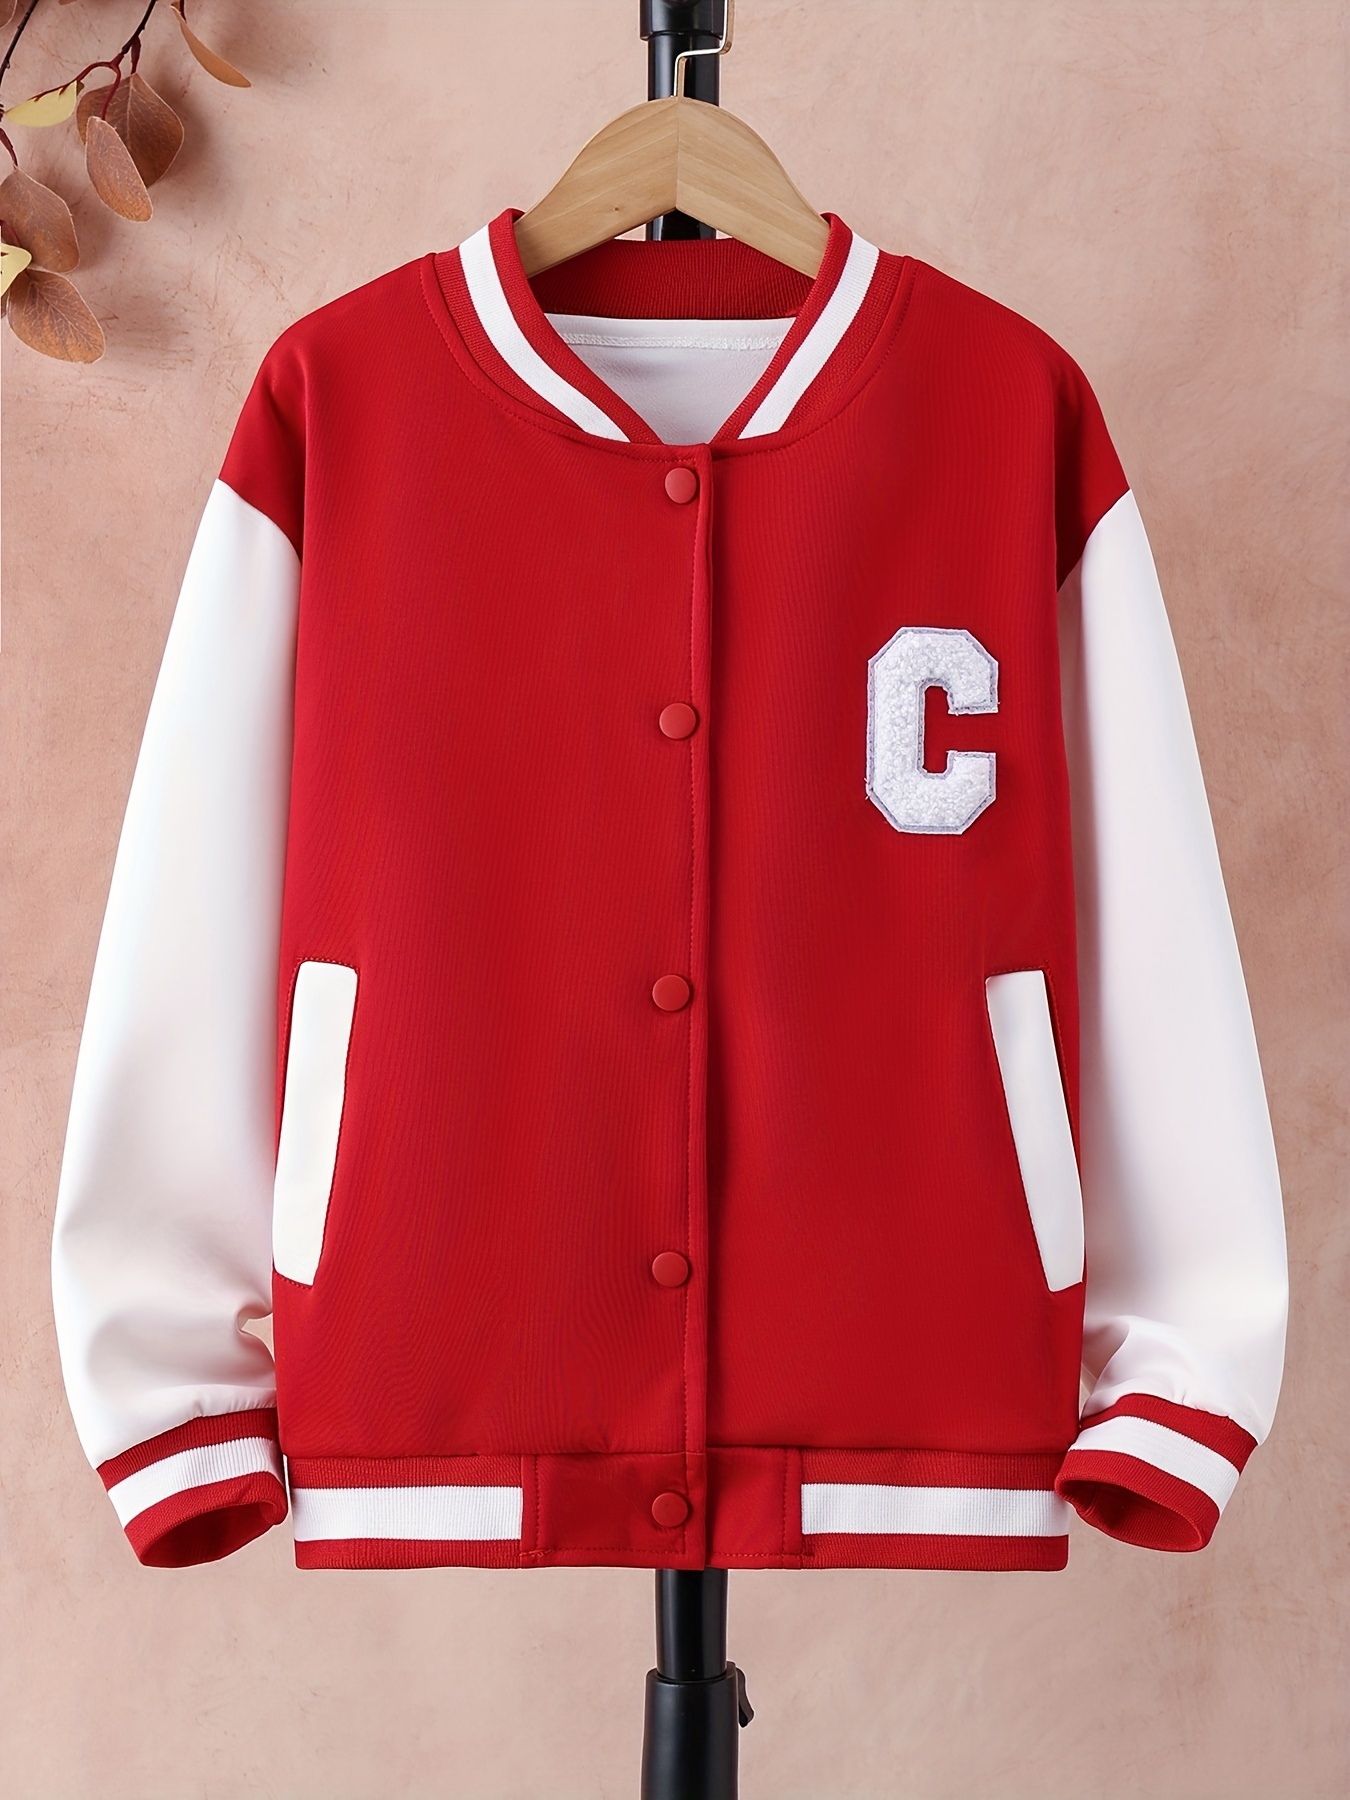 Girls Fashion Letter Embroidered Snap Button Varsity Jacket